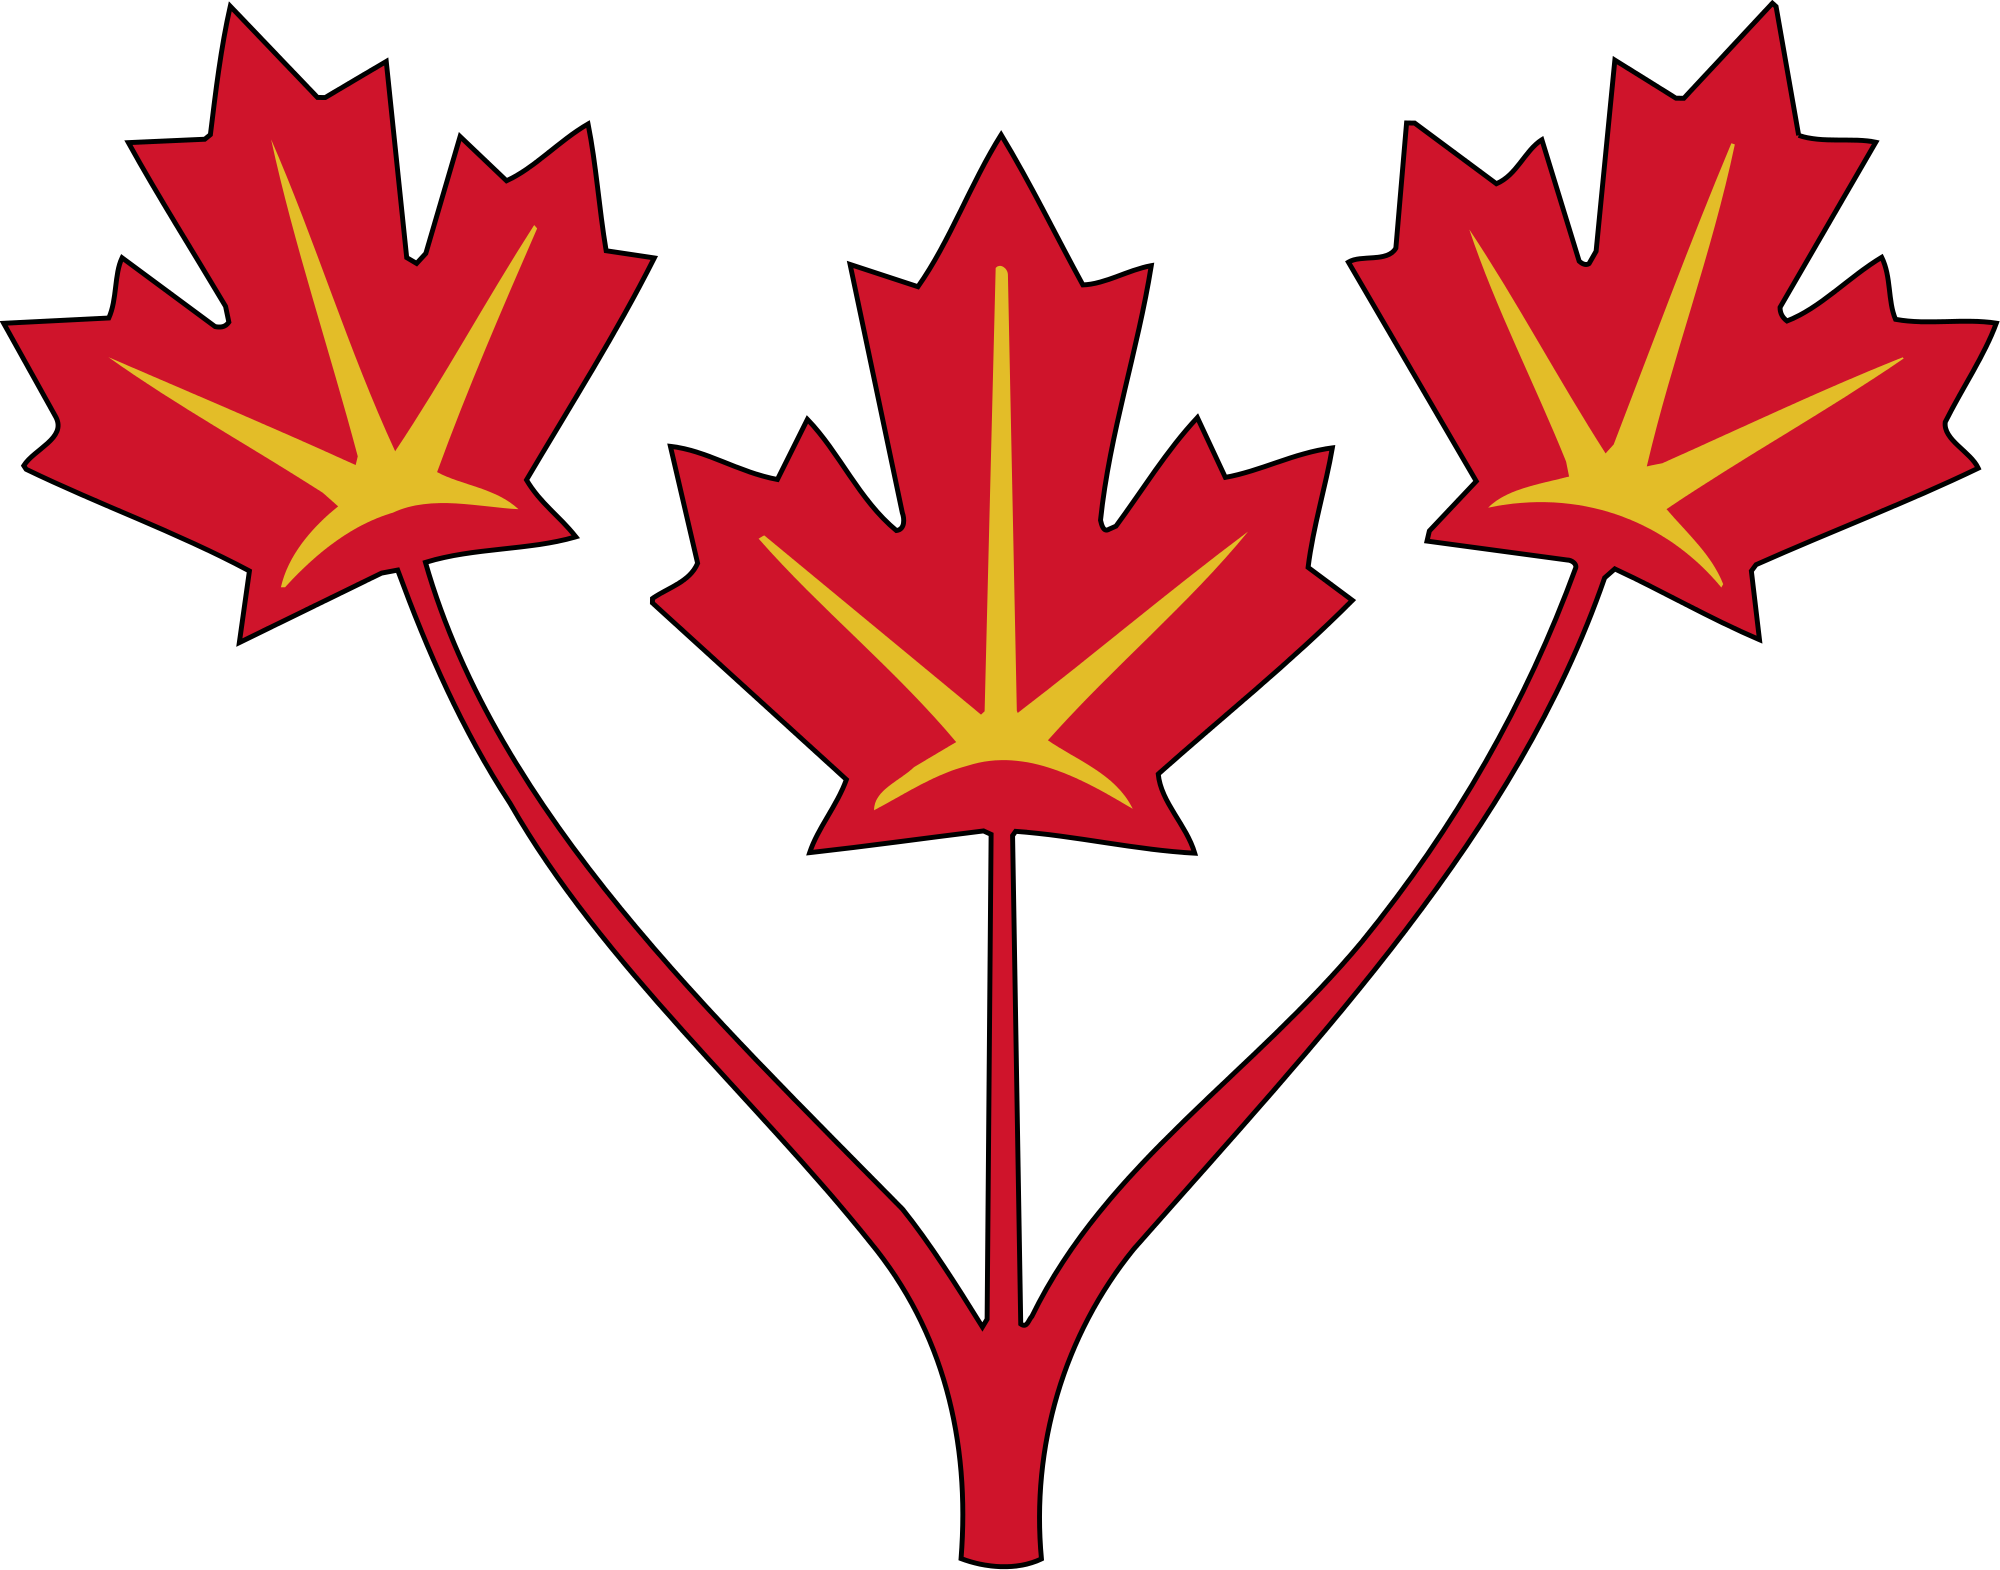 Three Maple Leaves Of Canada - Canadian Coat Of Arms Shield (2000x1570)